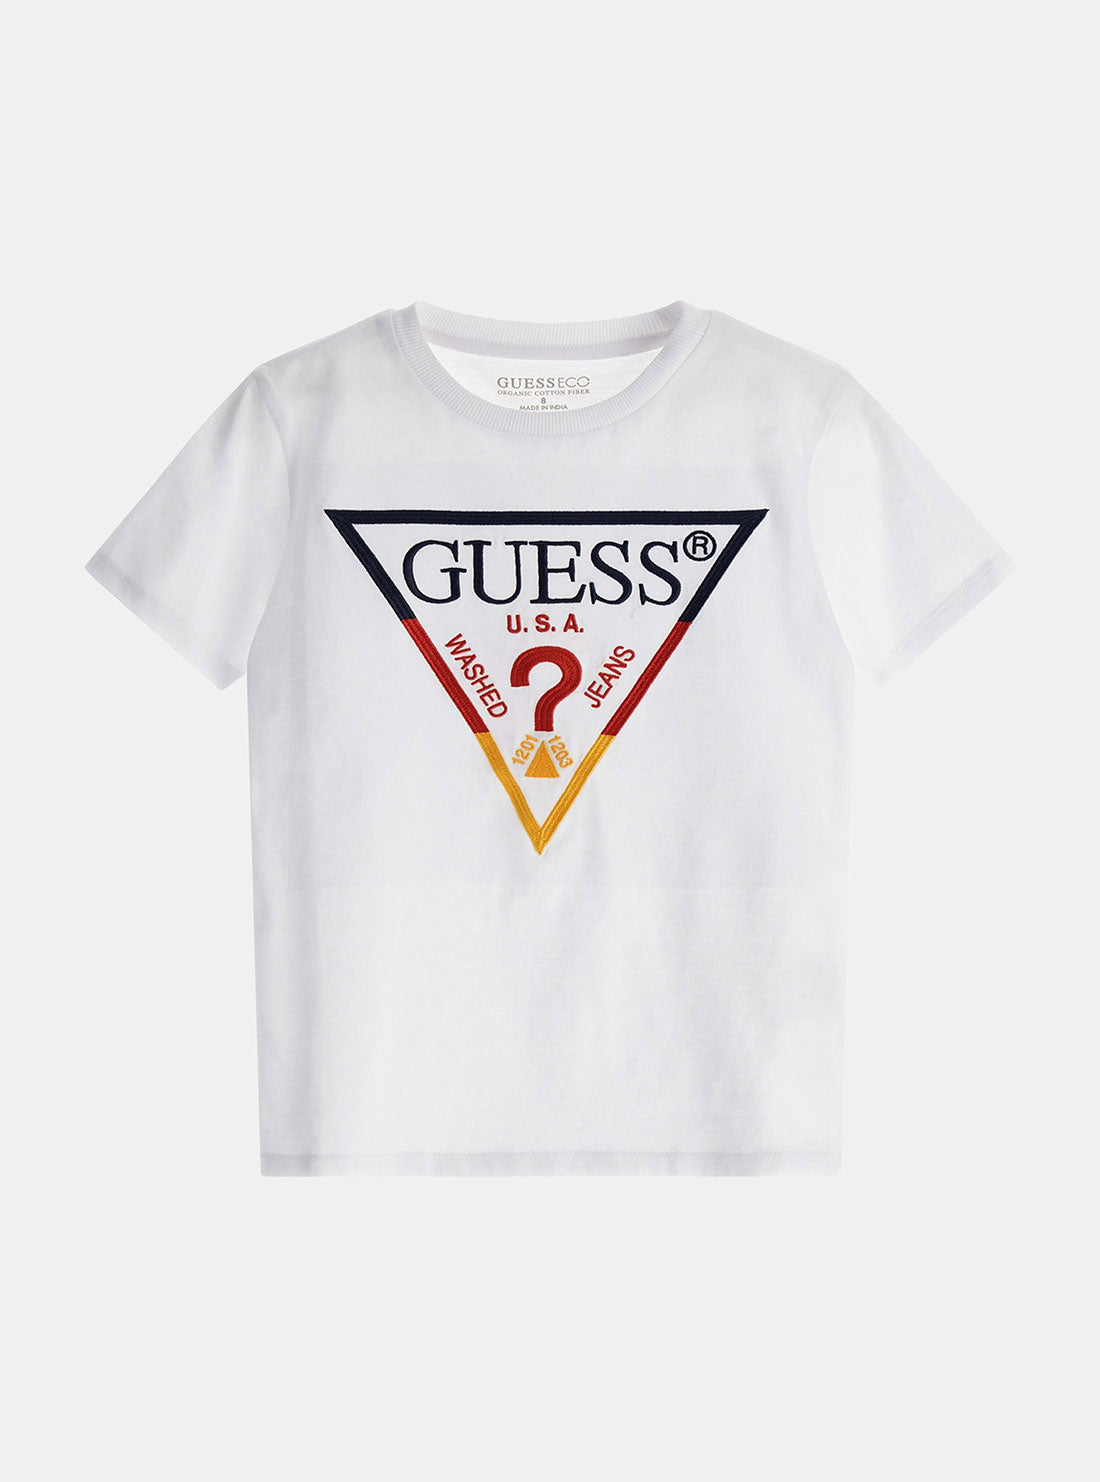 GUESS White Logo Short Sleeve T-Shirt (8-16) front view